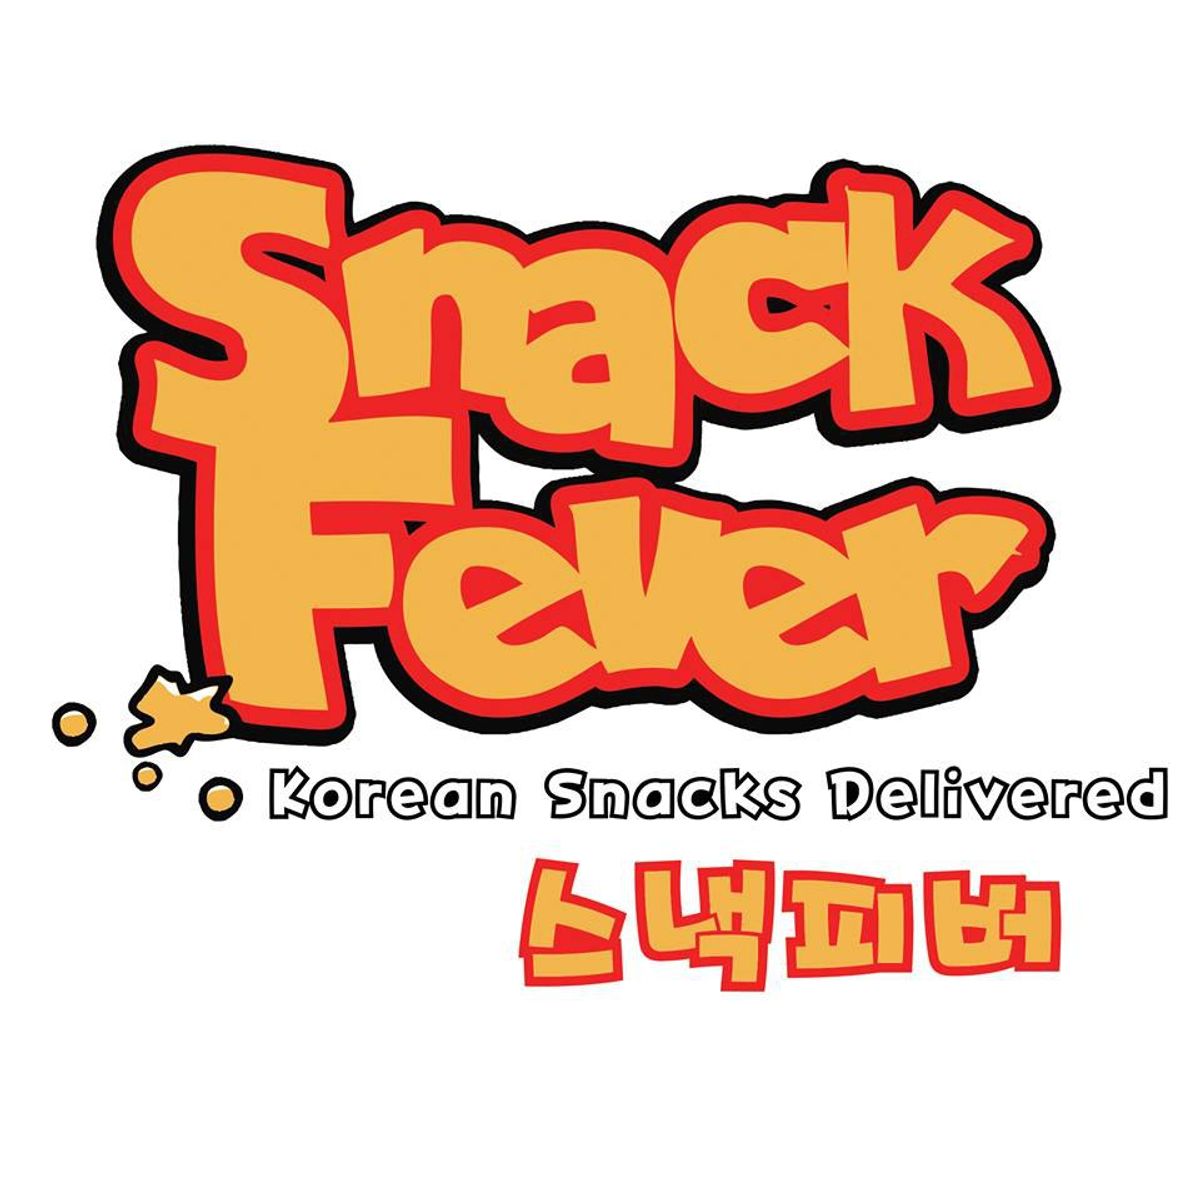 Why You Should Subscribe To SnackFever